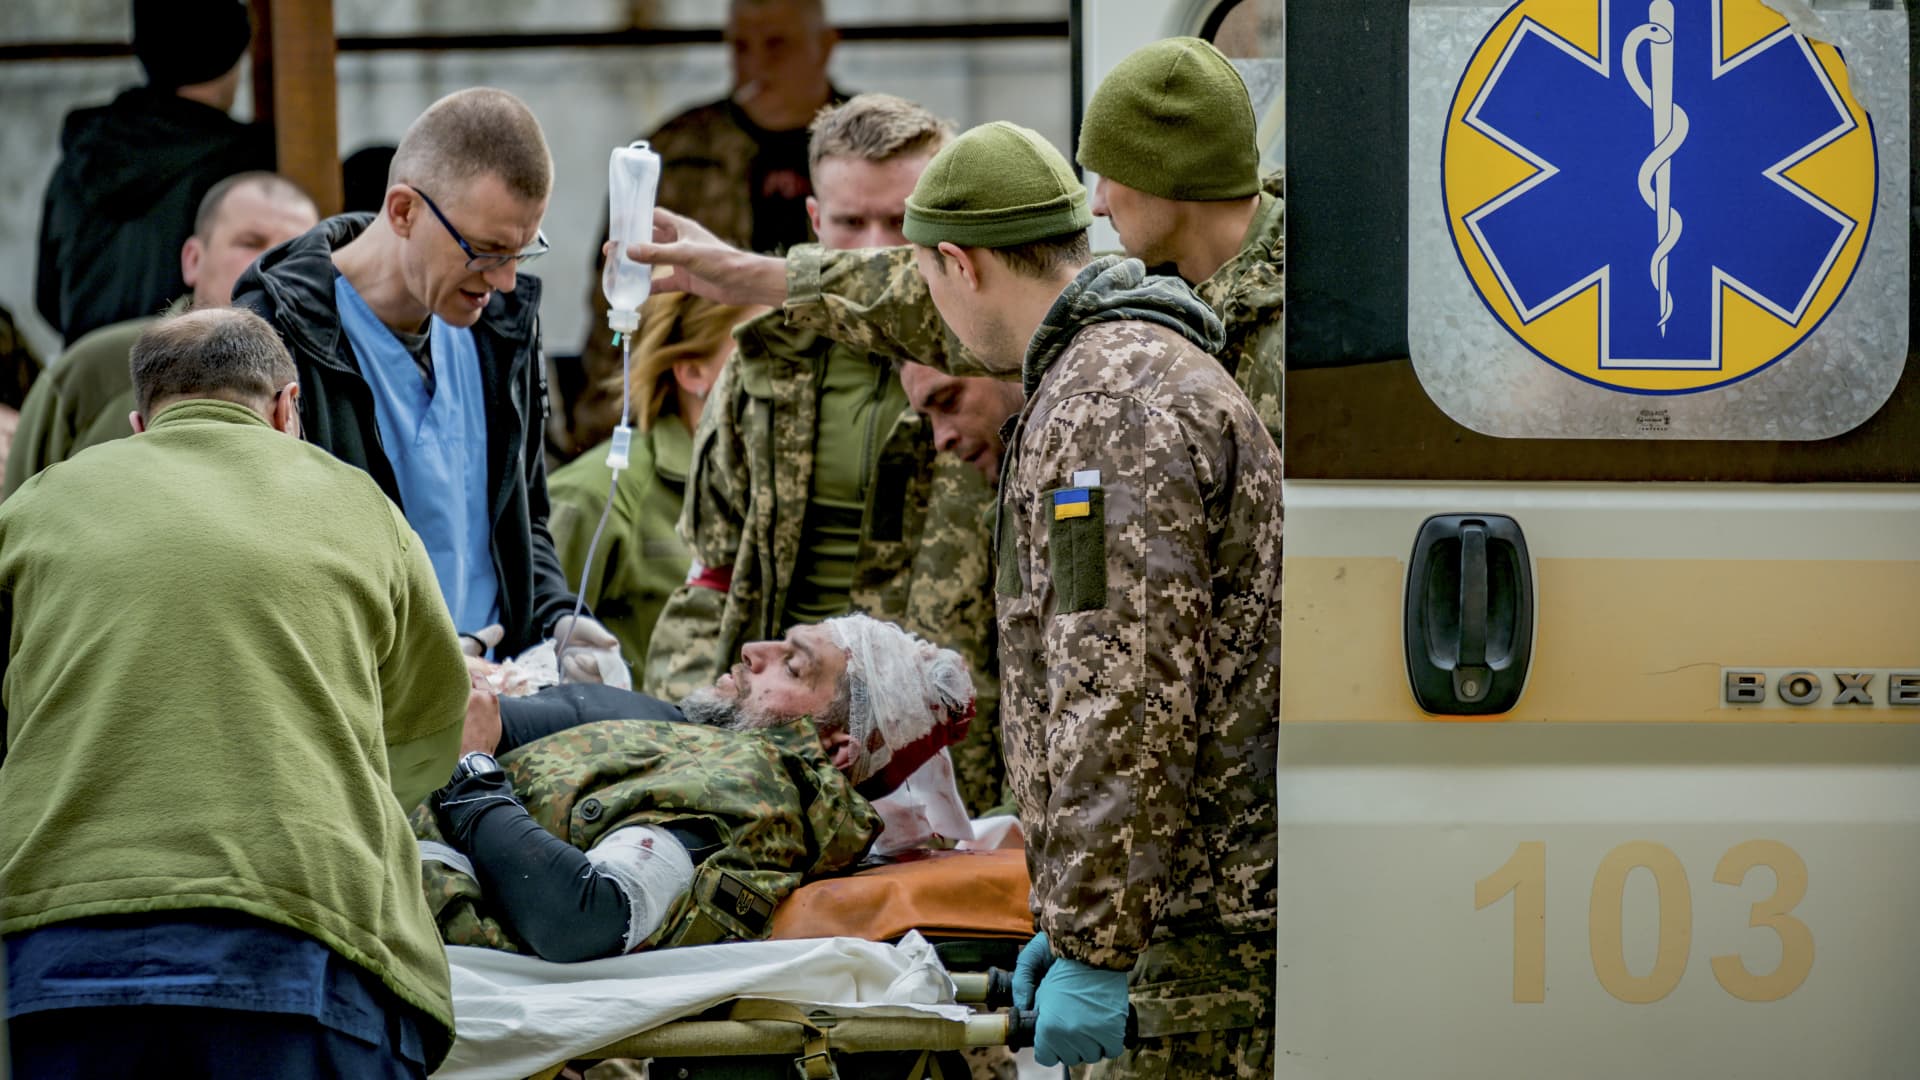 (EDITOR'S NOTE: Graphic Content) Ukrainian soldier arrives in an ambulance to the military hospital of Zaporizhzhia after being wounded in the combats of the Russia's war in Ukraine. 